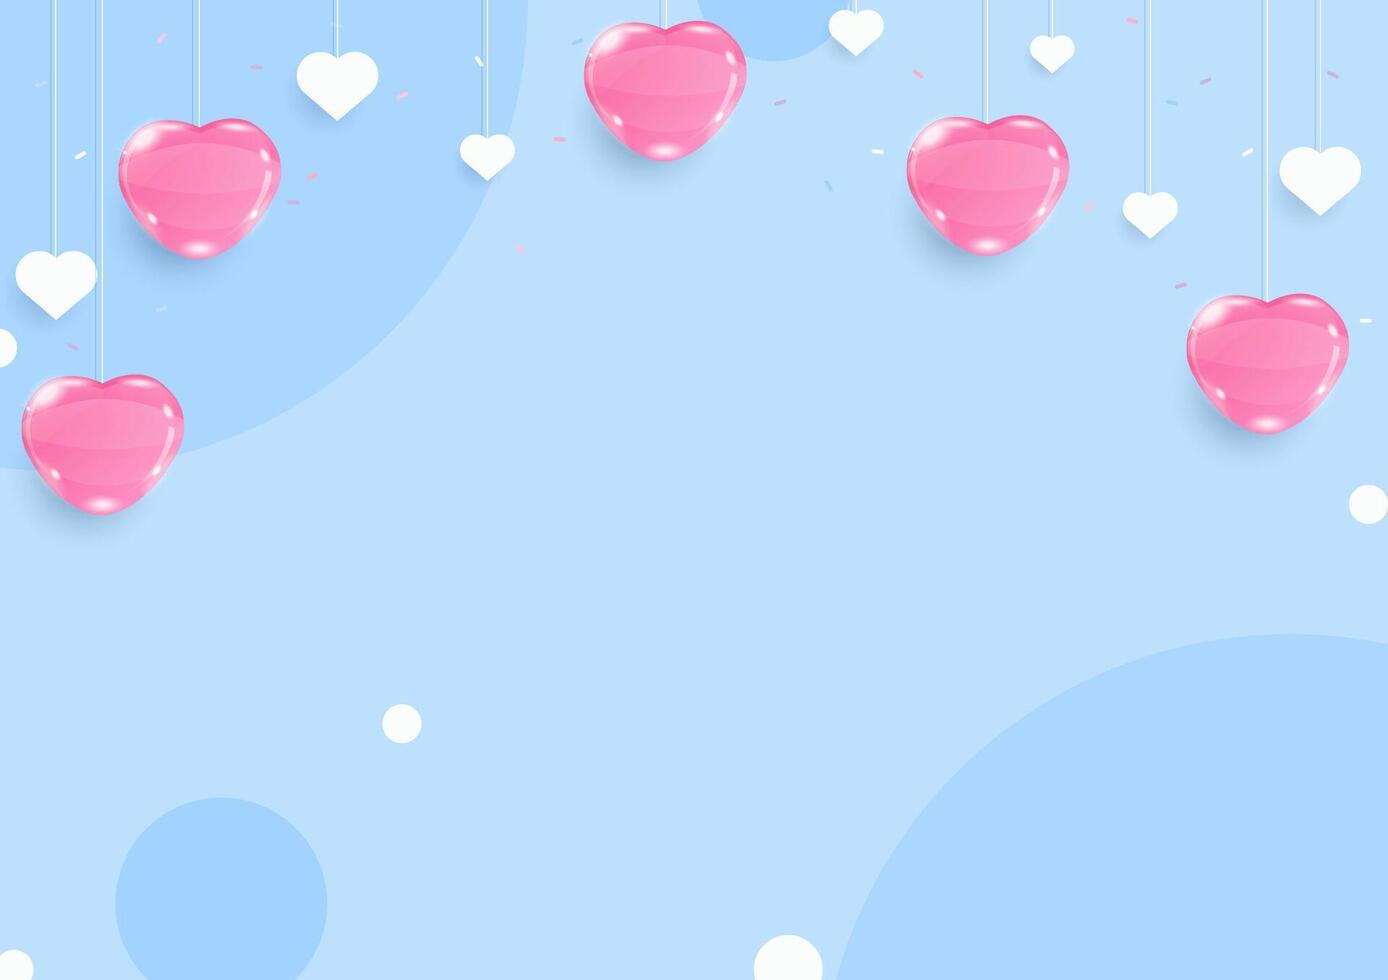 Heart balloons and paper on blue background vector